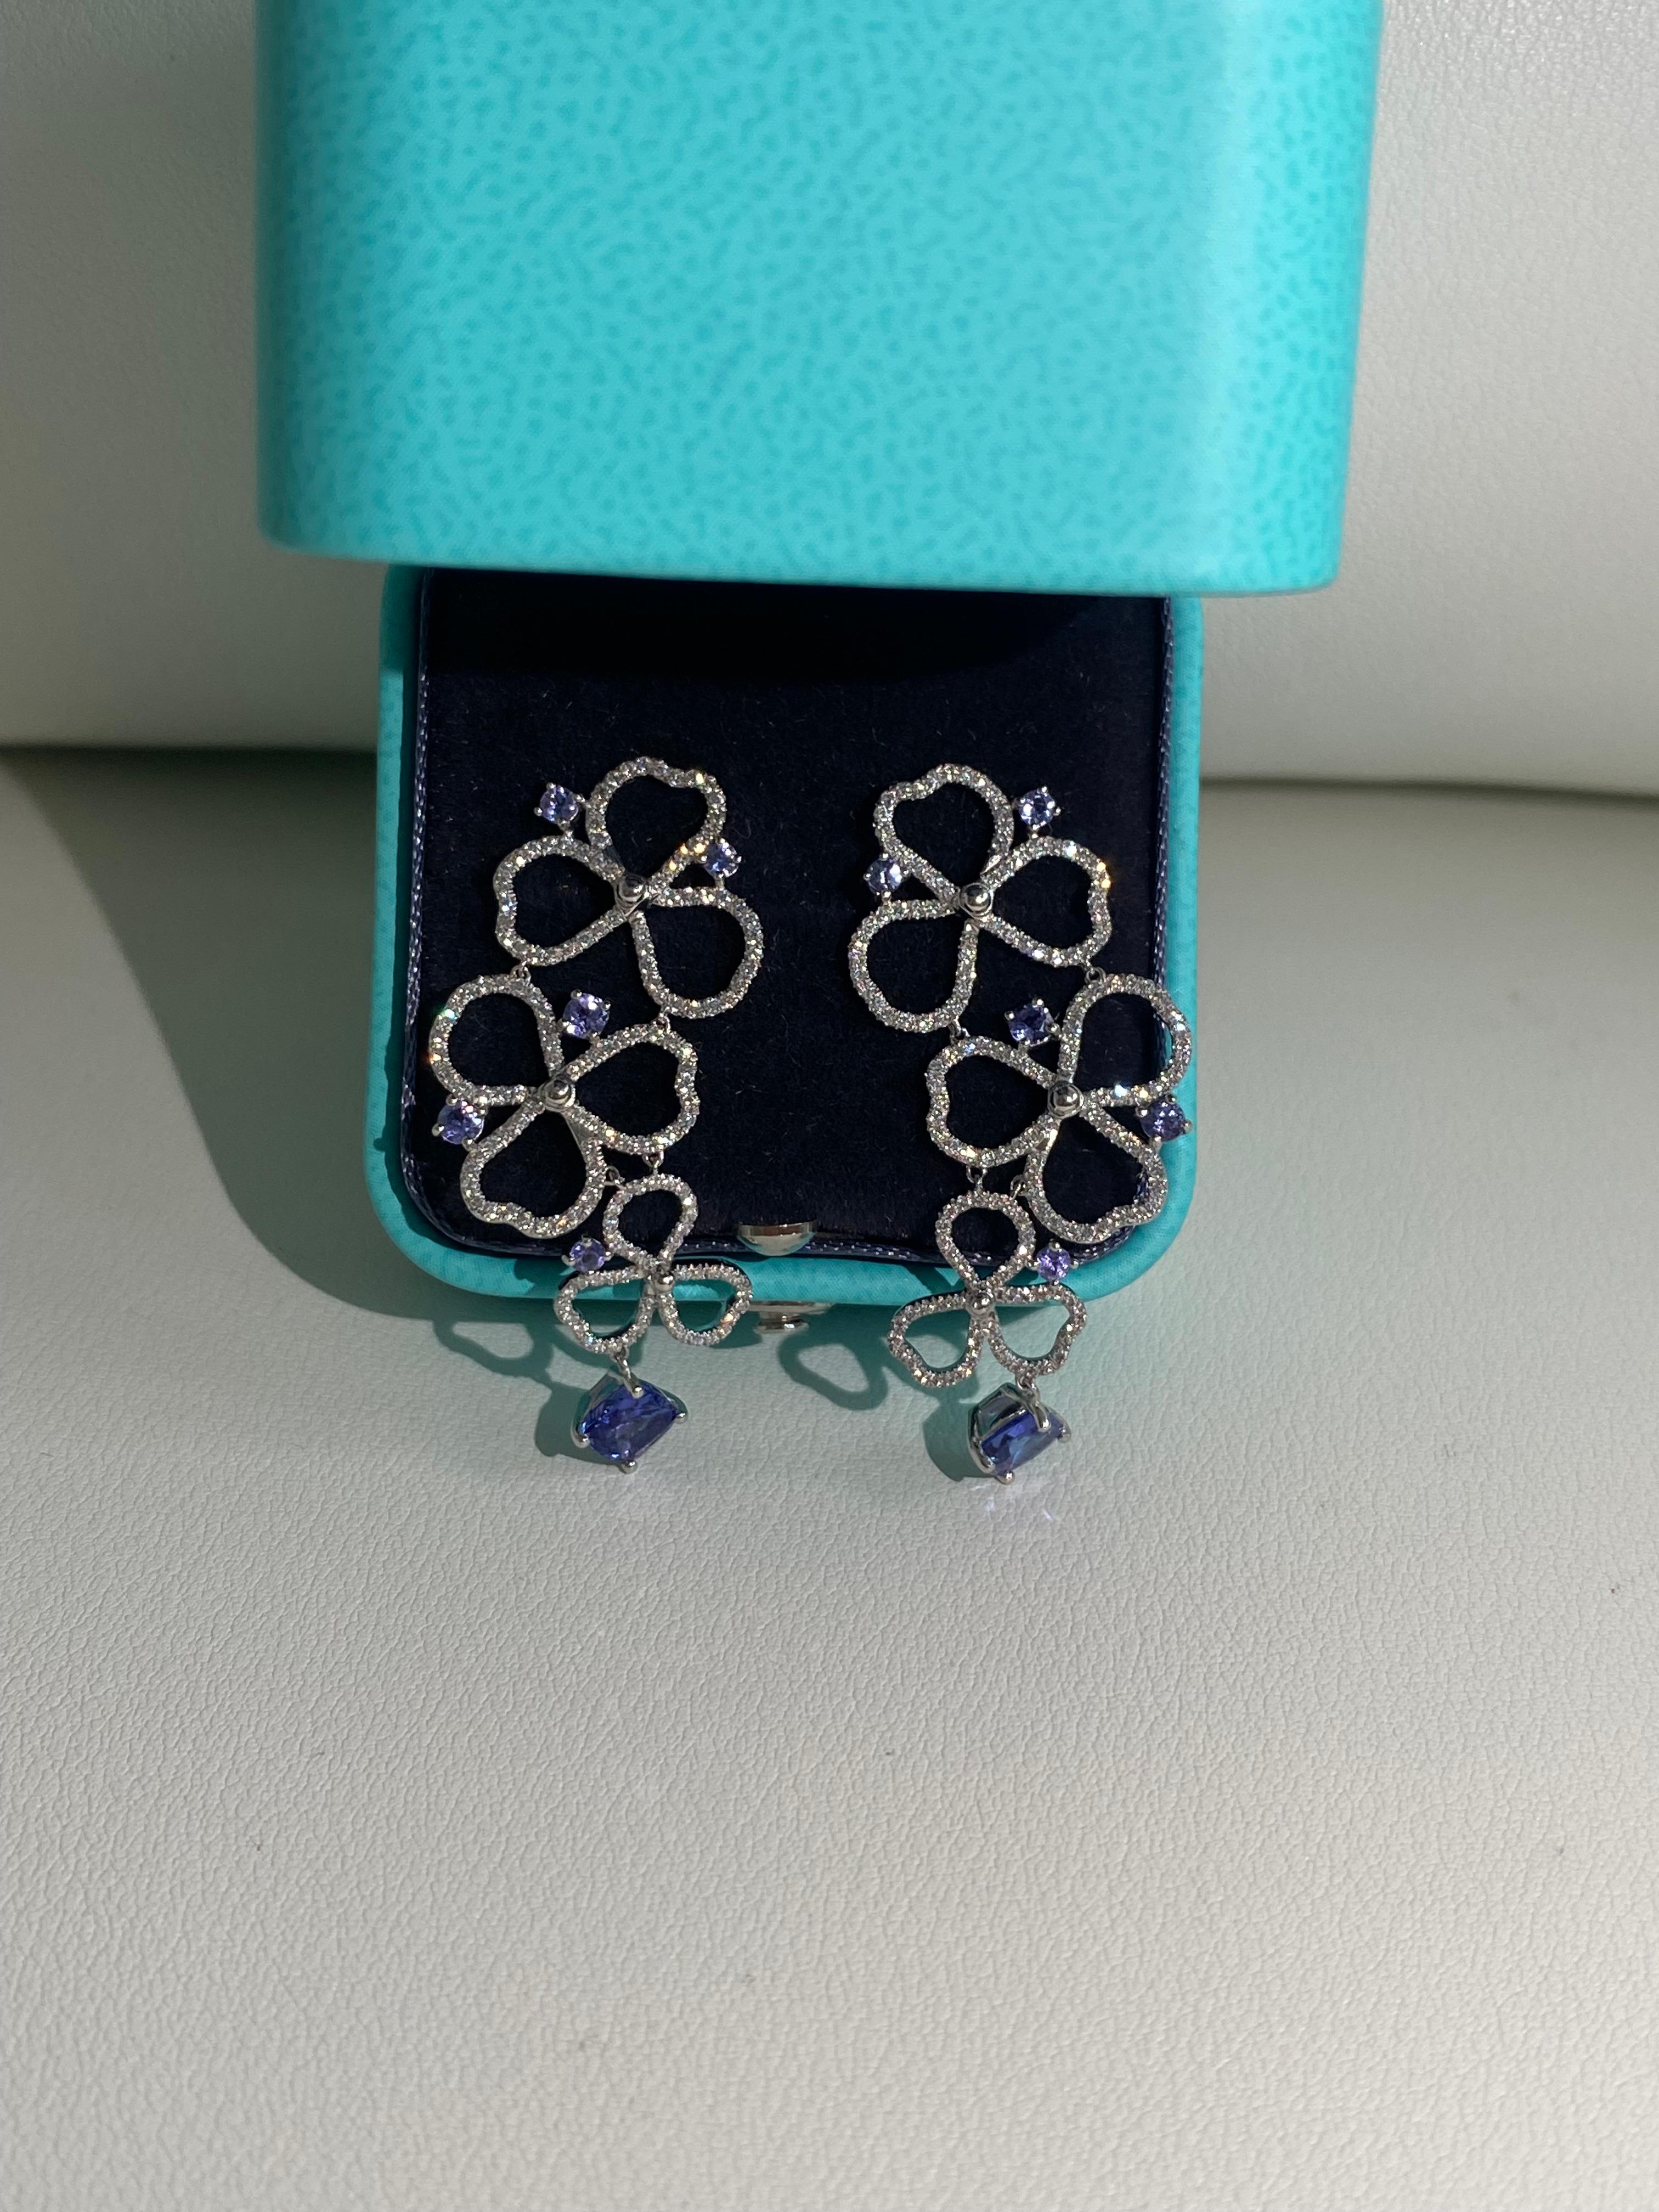 Tiffany CO Paper flower drop earrings with tanzanites and diamonds 
made in platinum 
3 open dangling flowers 
Diamonds : approx. 0.56 ctw
Tanzanites: approx. 1.68 ctw.
Length: 41 mm
Width: 20 mm
Weight: approx. 10.60 grams
La Pousette